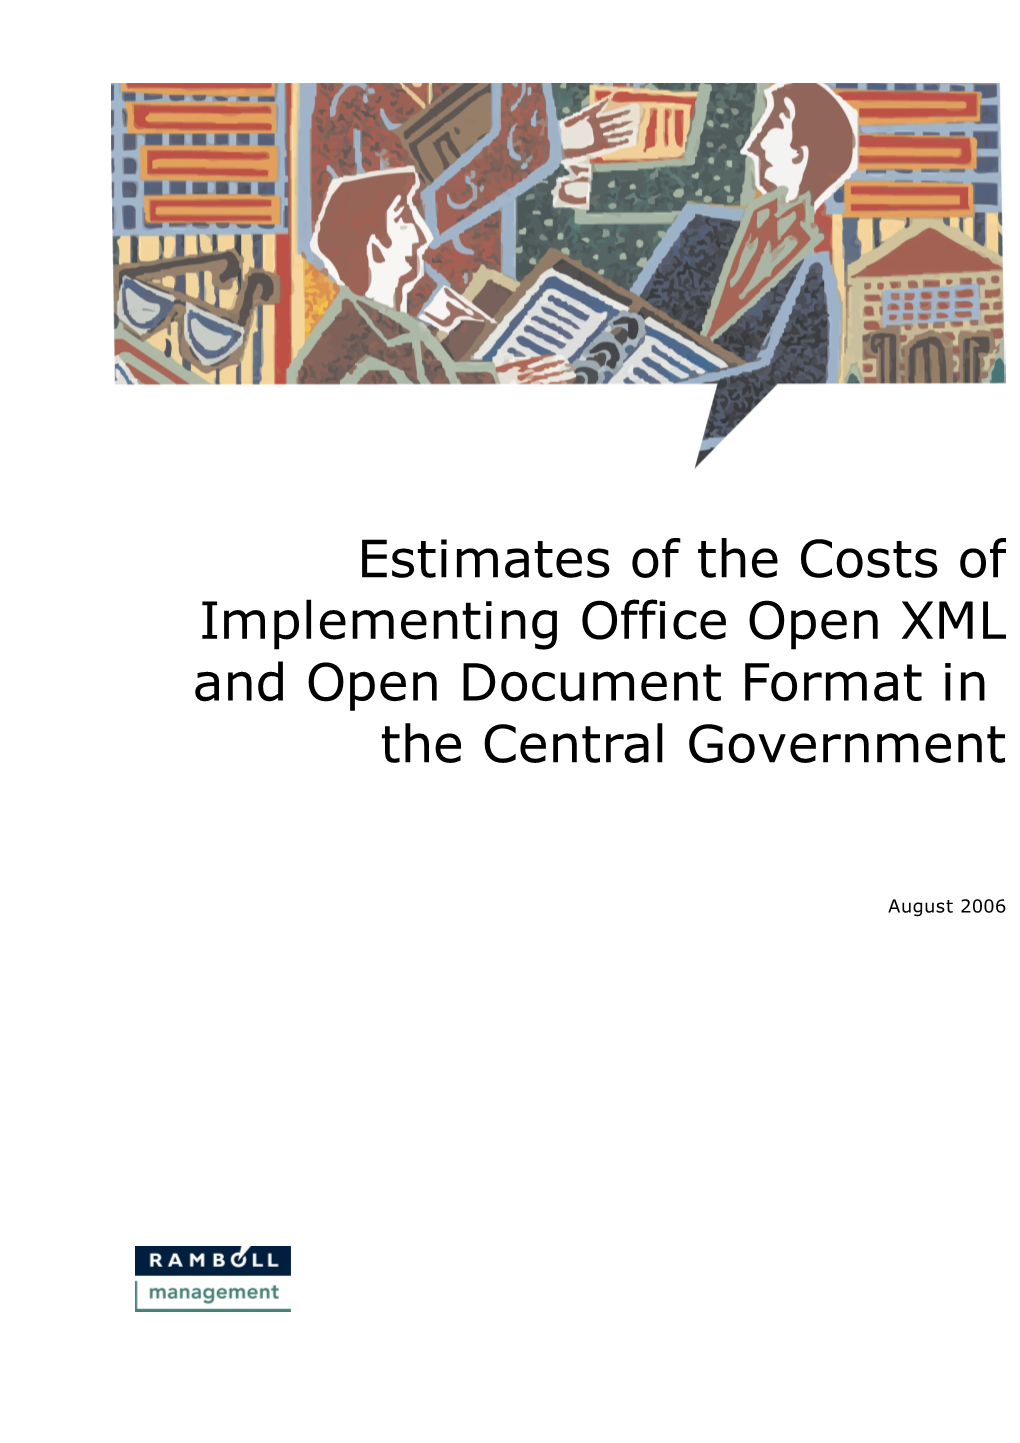 Estimates of the Costs of Implementing Office Open XML and Open Document Format in the Central Government